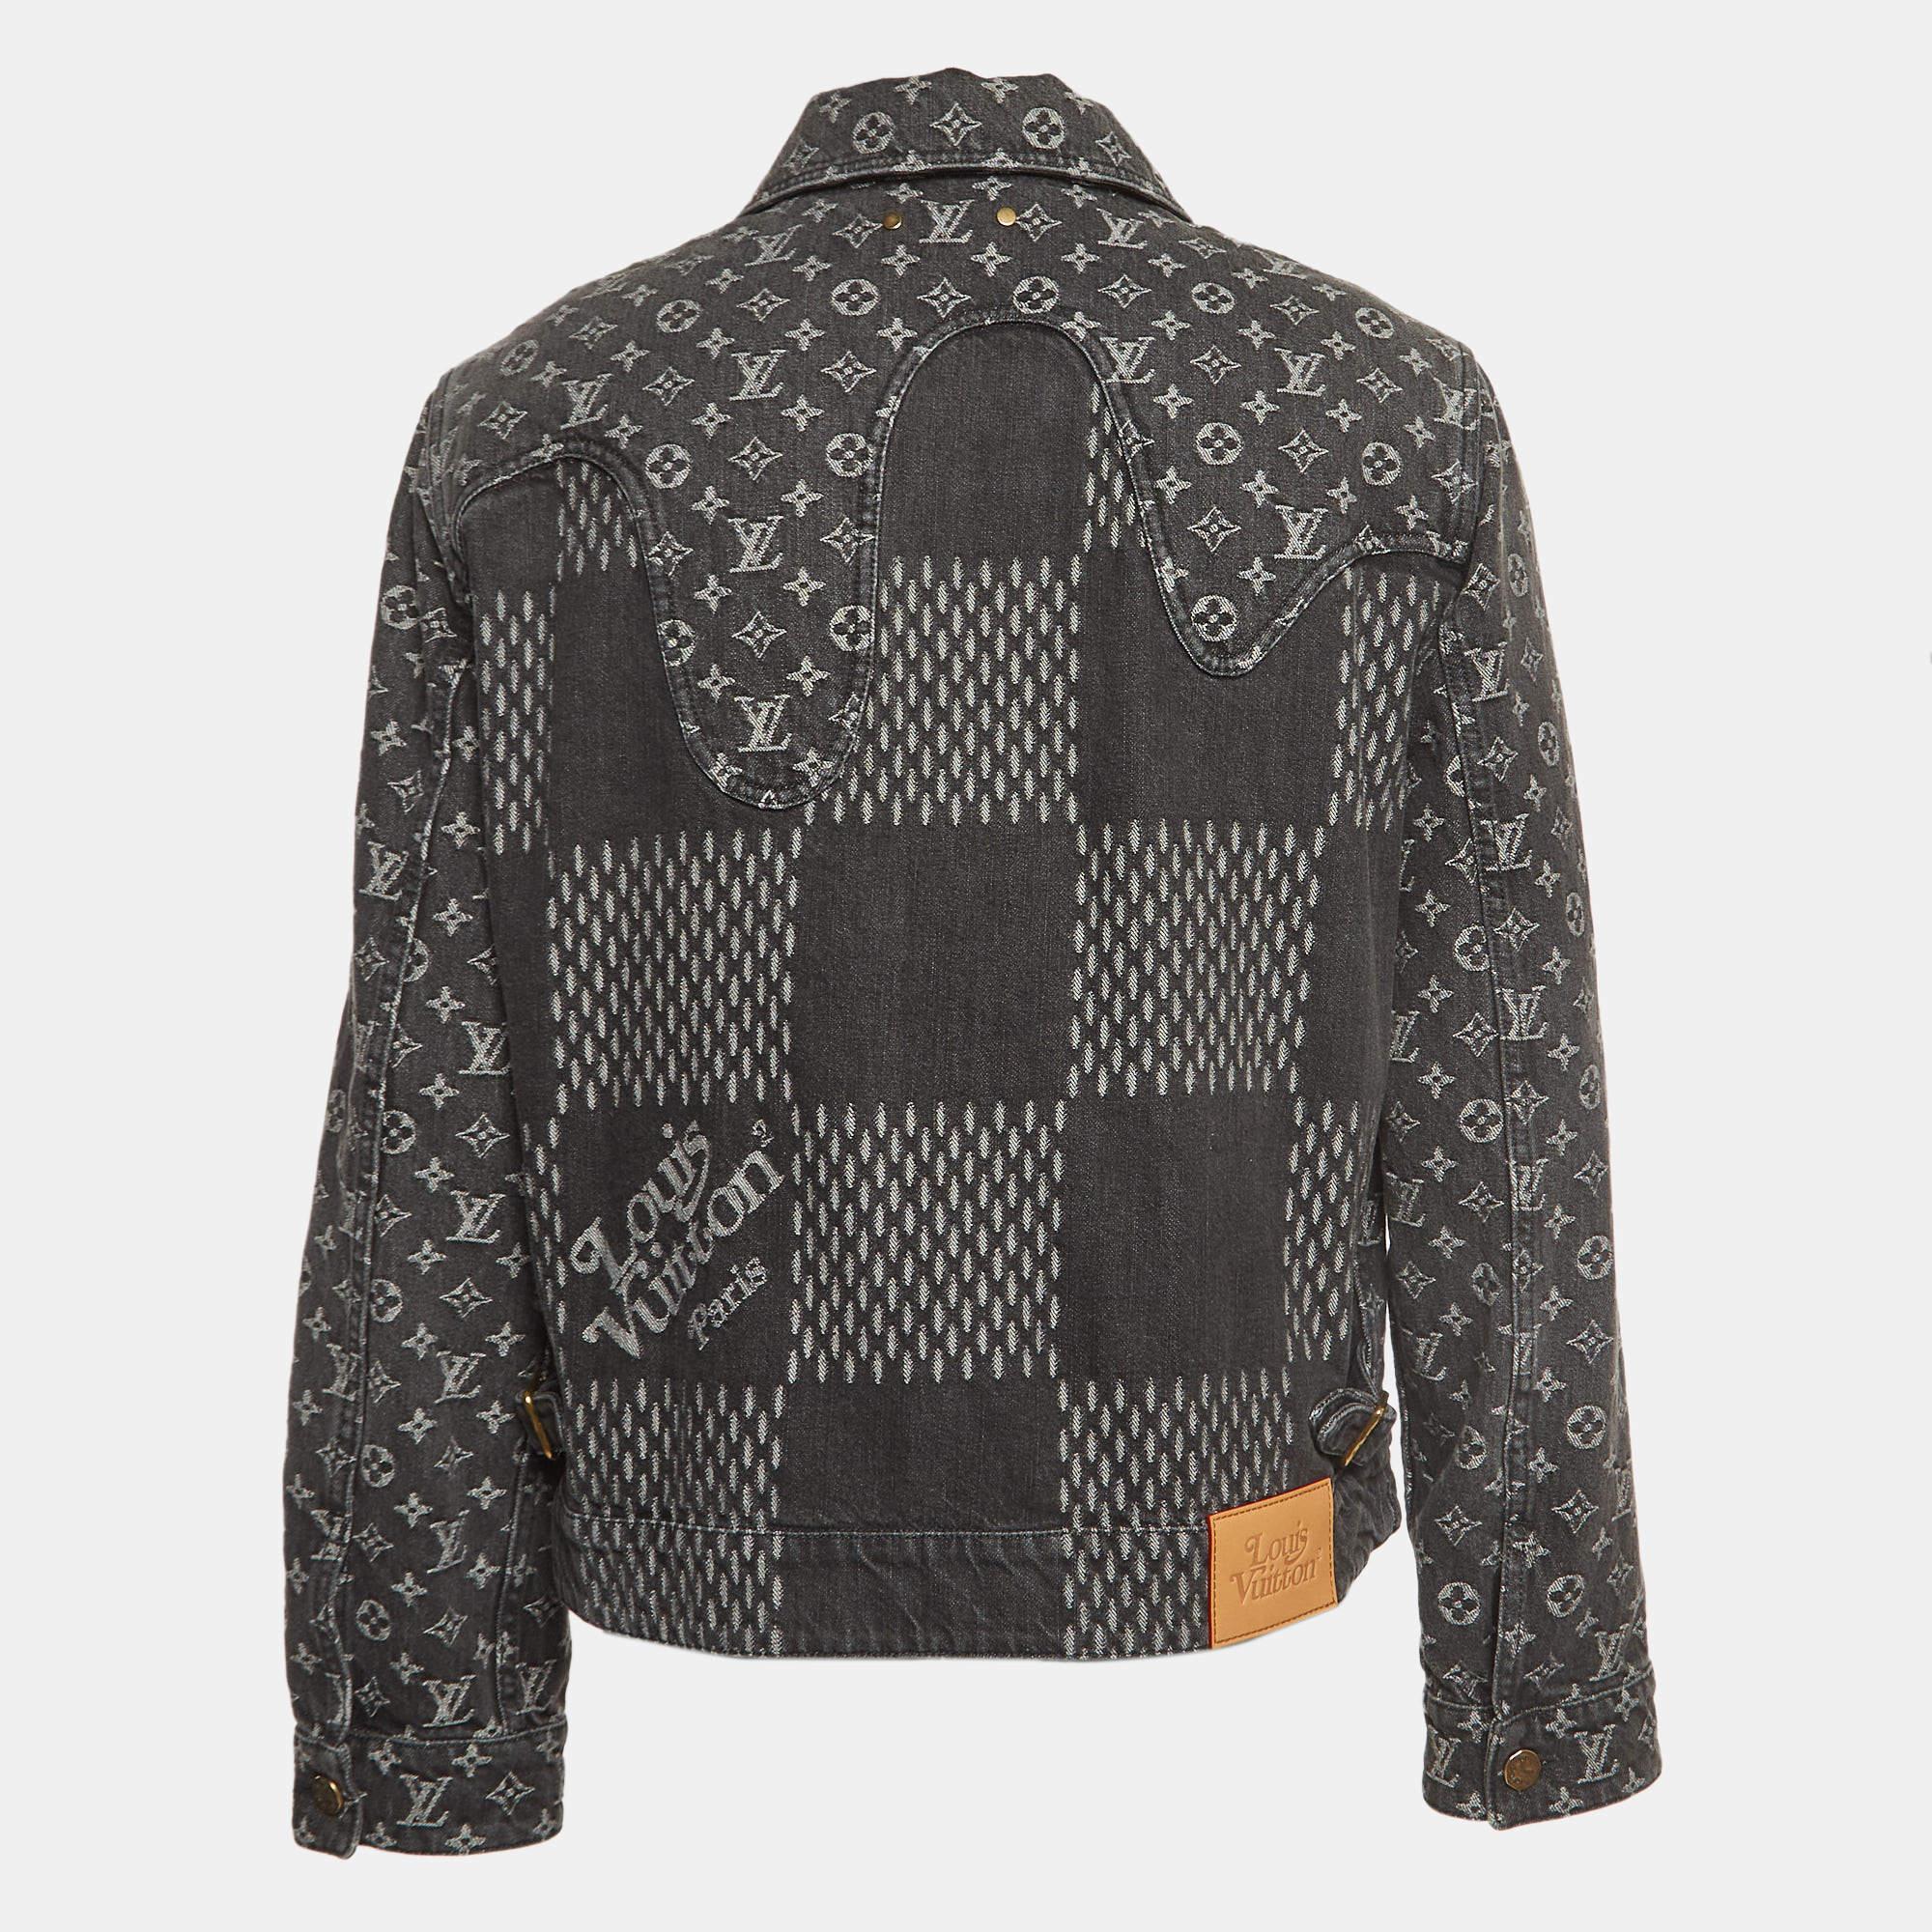 This jacket is a prize you will want to keep even if you have worn it countless times. It is a Louis Vuitton Virgil Abloh X Nigo piece and it truly is an example of the brand's attention to quality and timeless creativity. The jacket is tailored